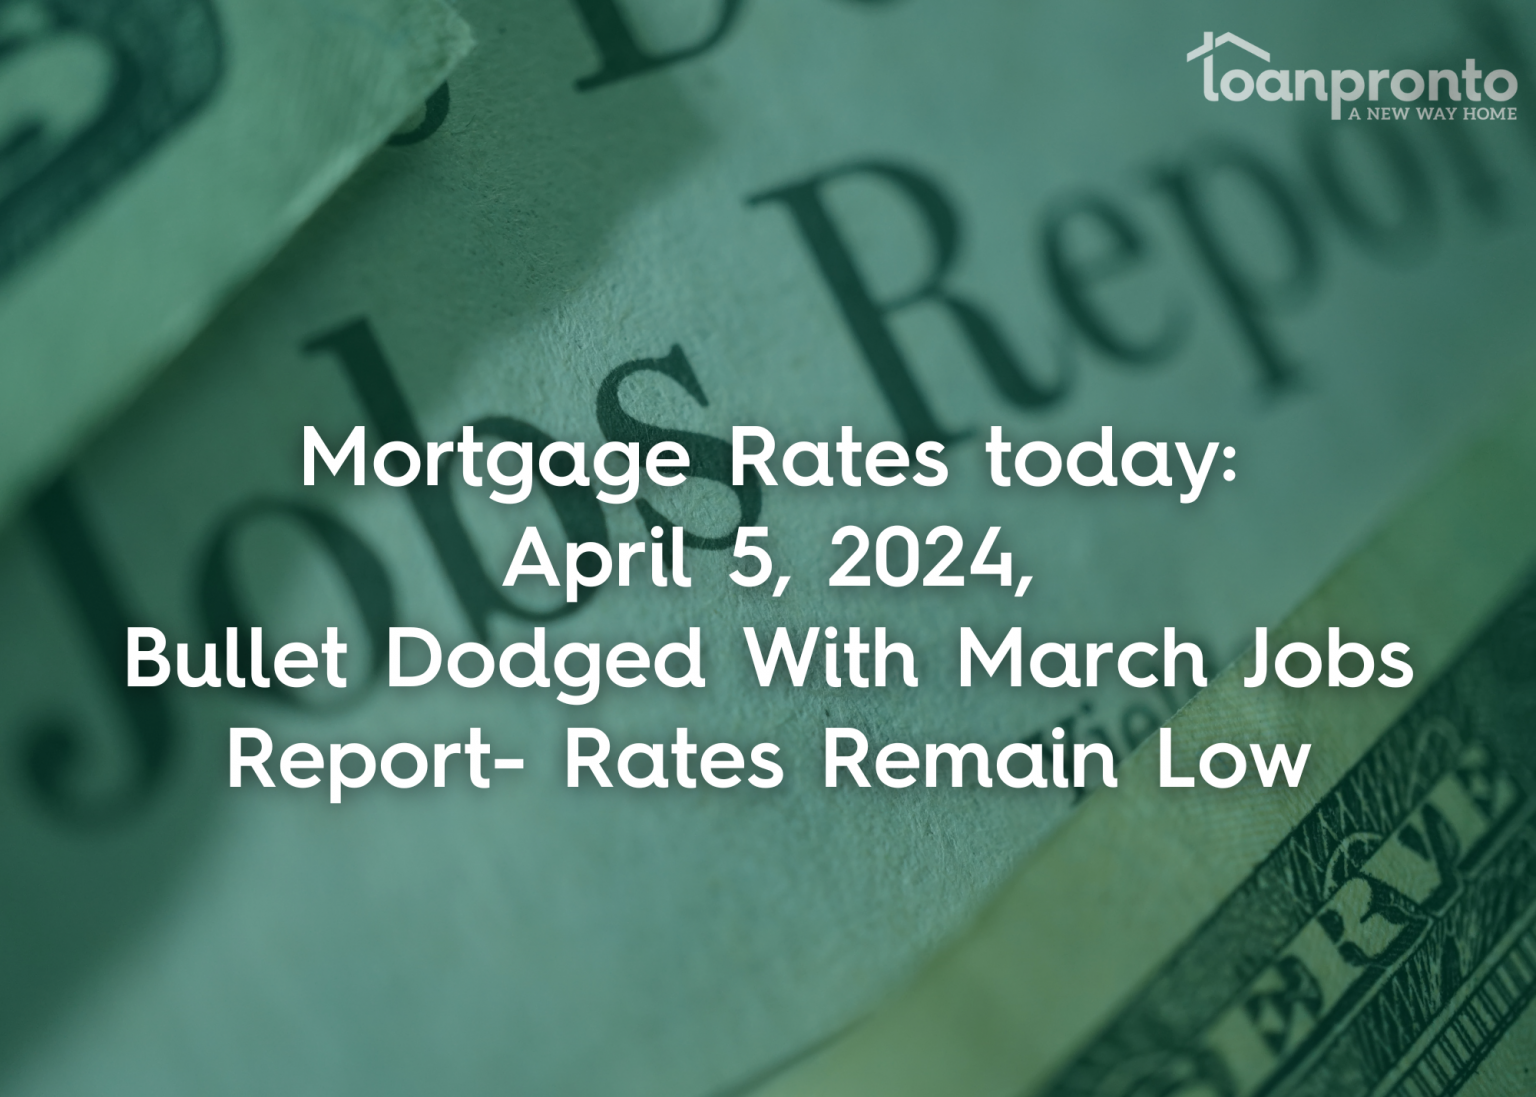 mortgage rates update and market conditions based on jobs report